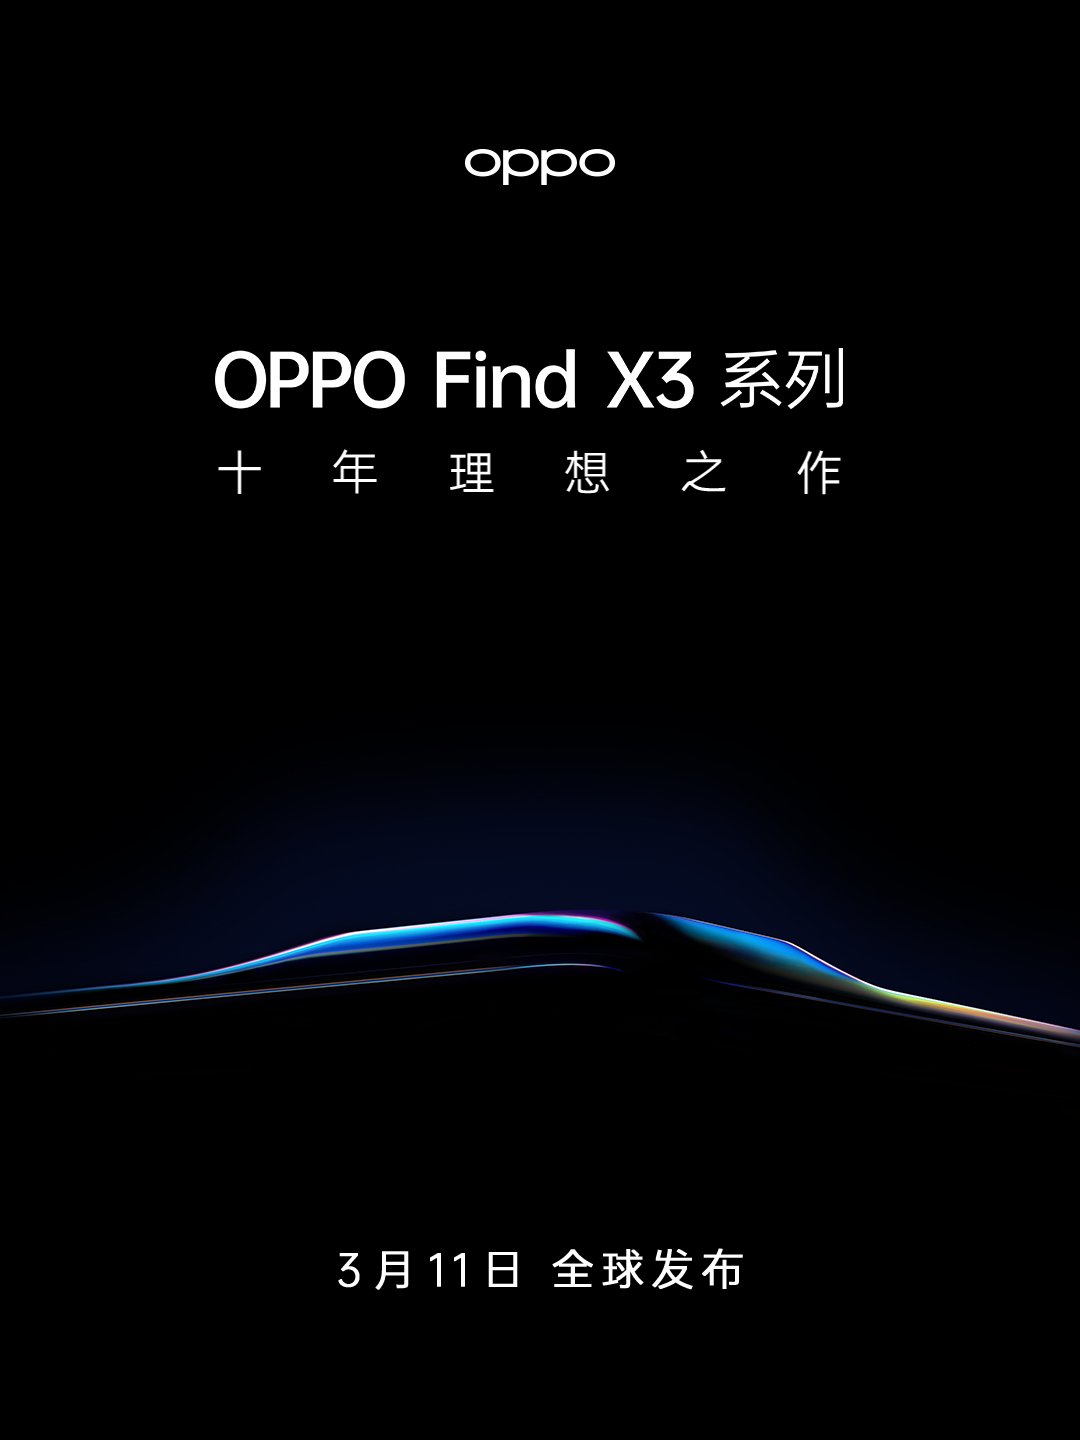 OPPO Find X3 series launch date is March 11